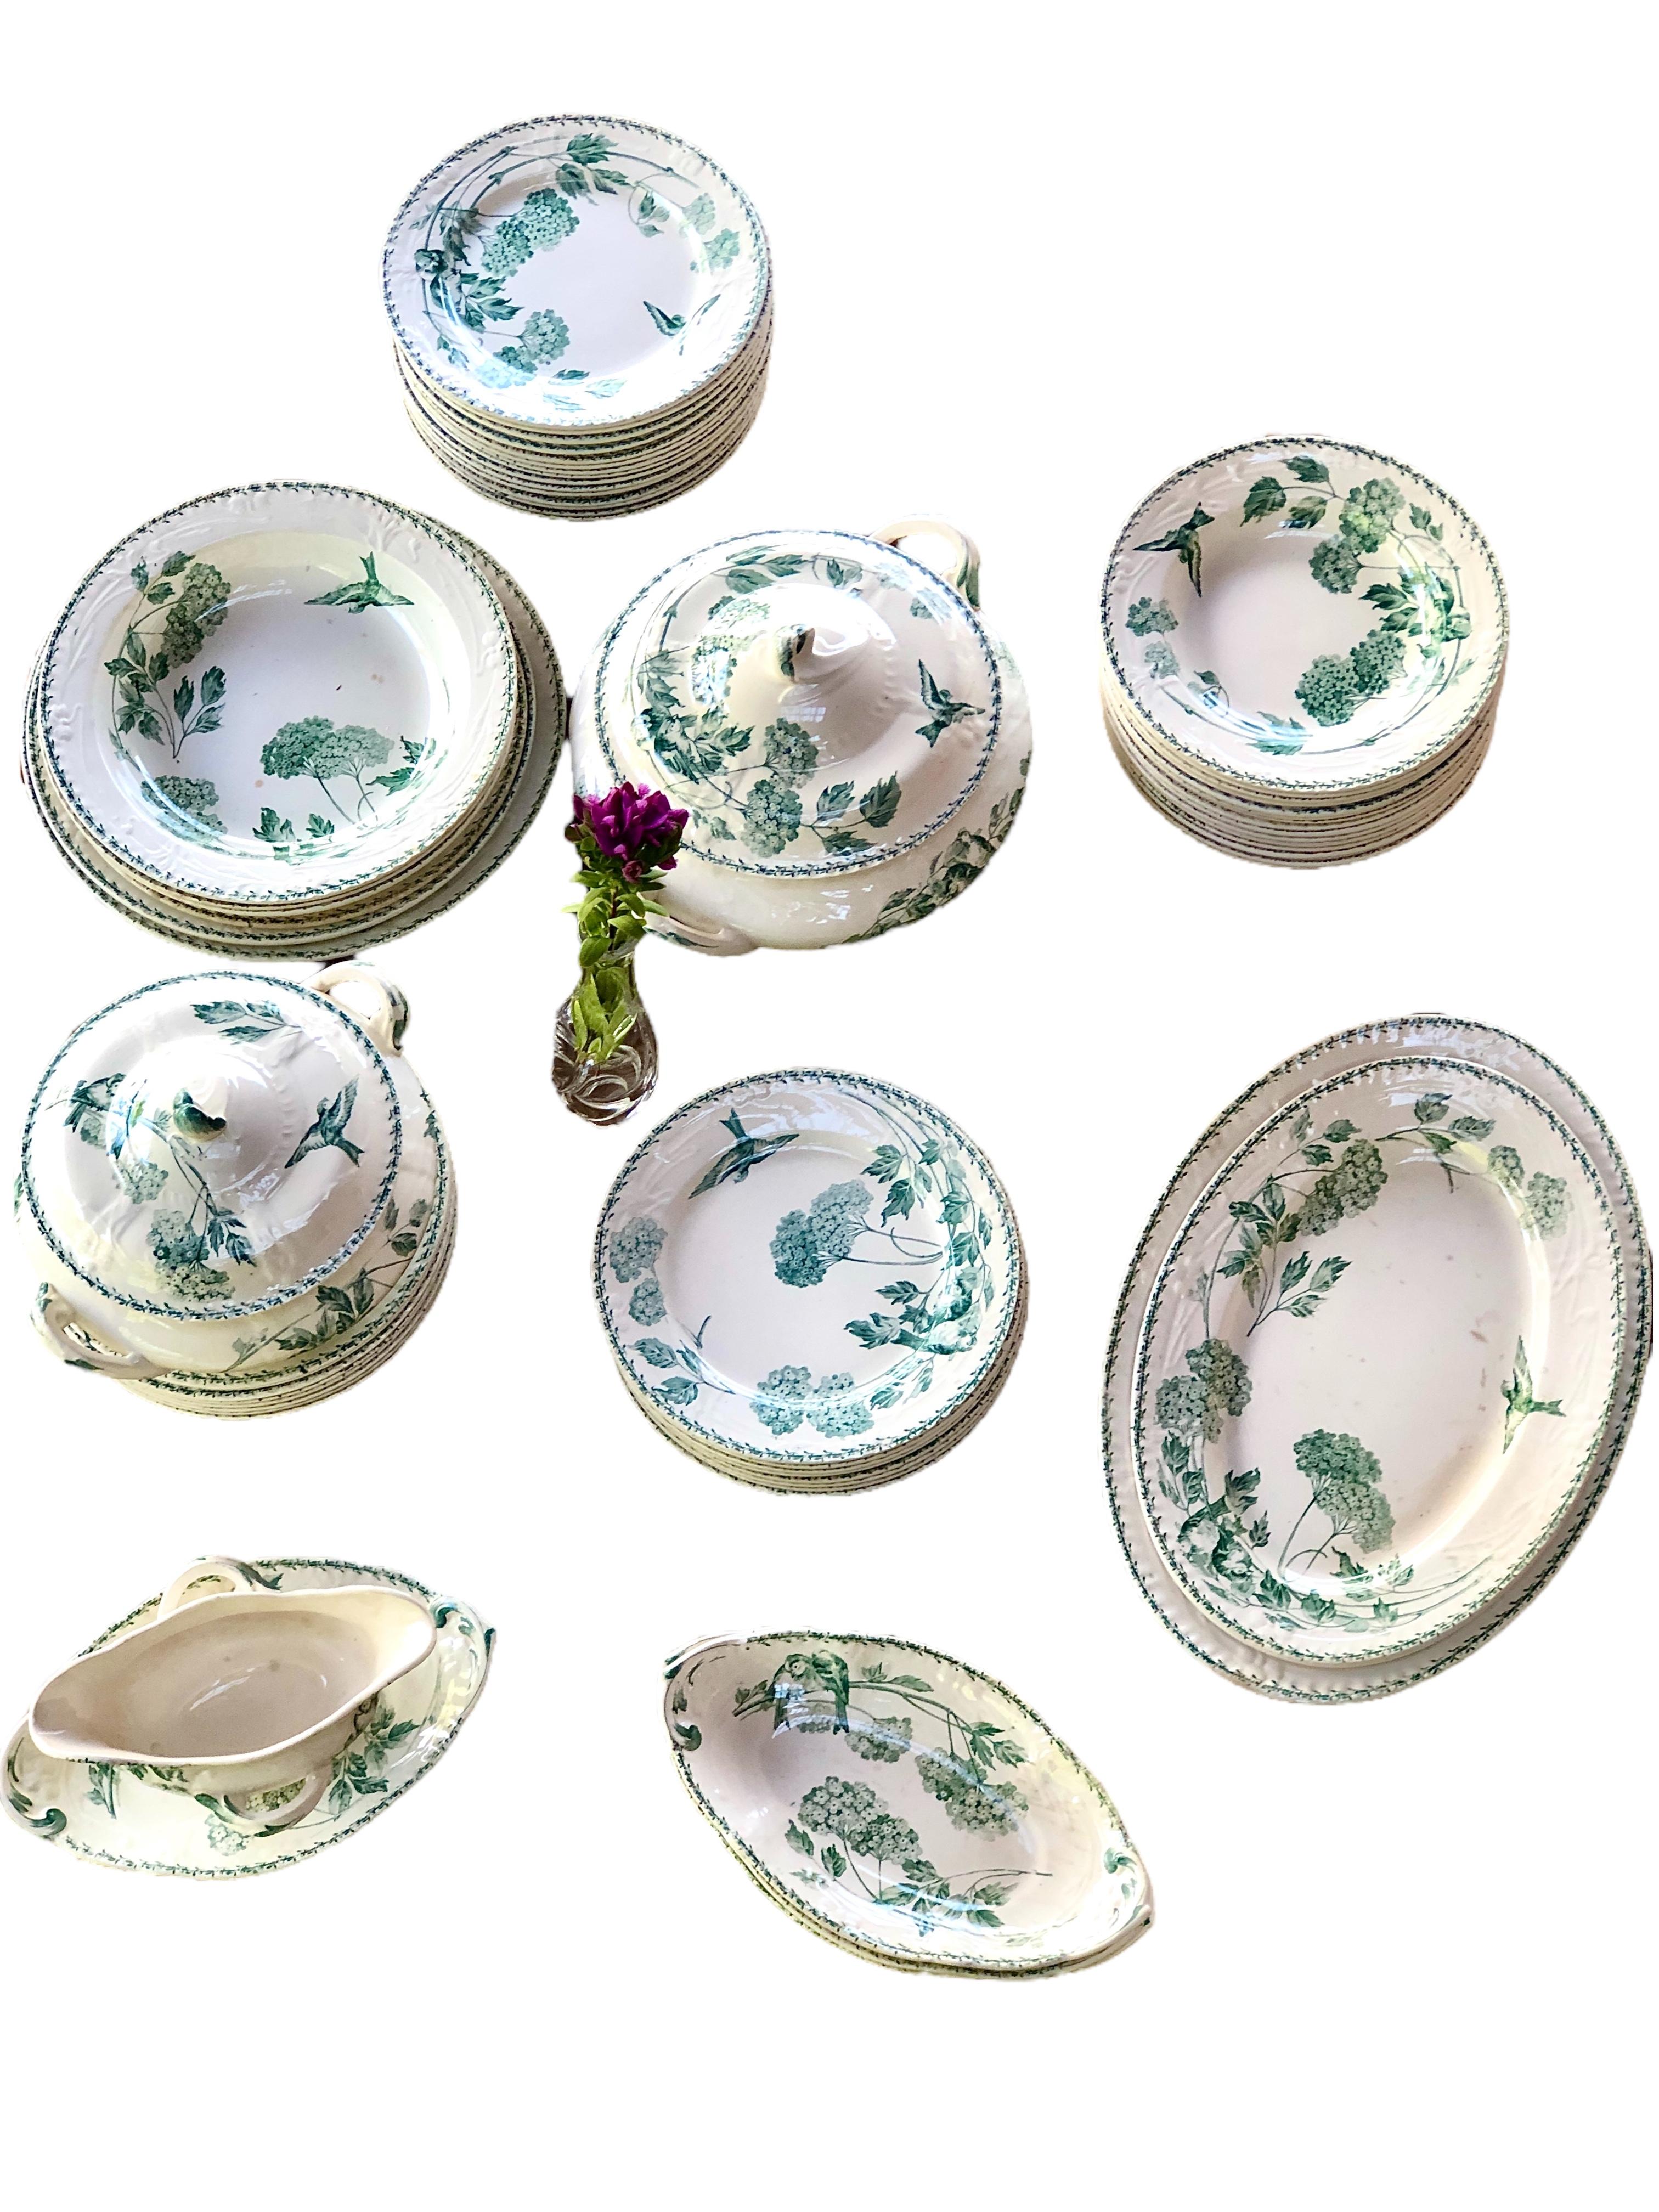 63 pieces of 19th-century Creil Montereau “Naples” French Faience Dinner Service, with serving pieces, in a white glaze with a simple green design of birds and flowers. In good antique condition with some marks and scratches from previous use.
30